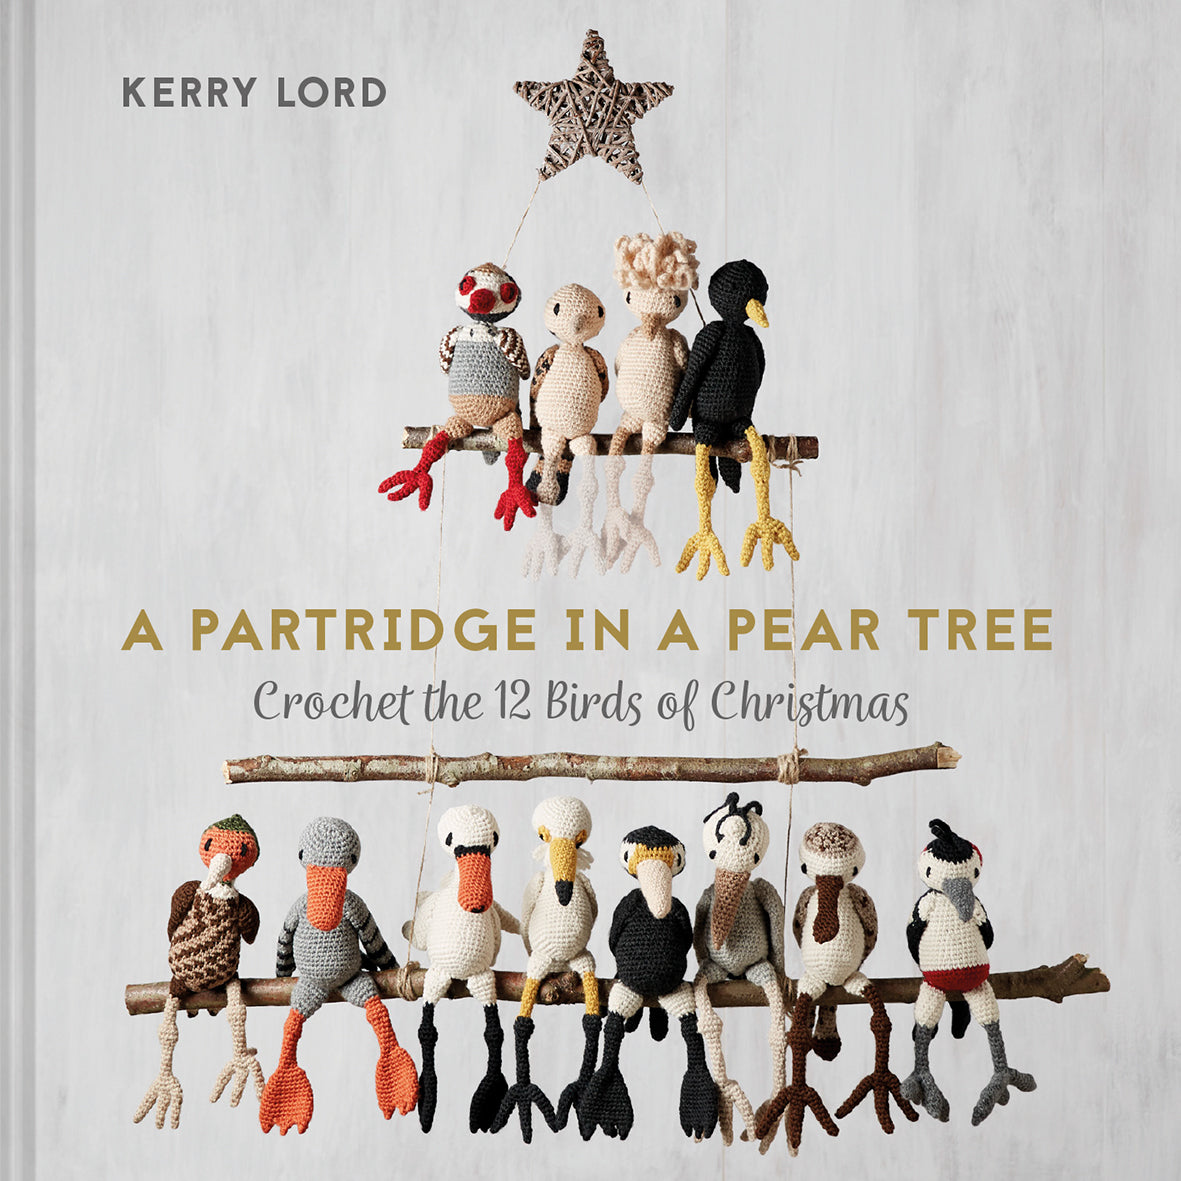 A Partridge in a Pear Tree | Kerry Lord